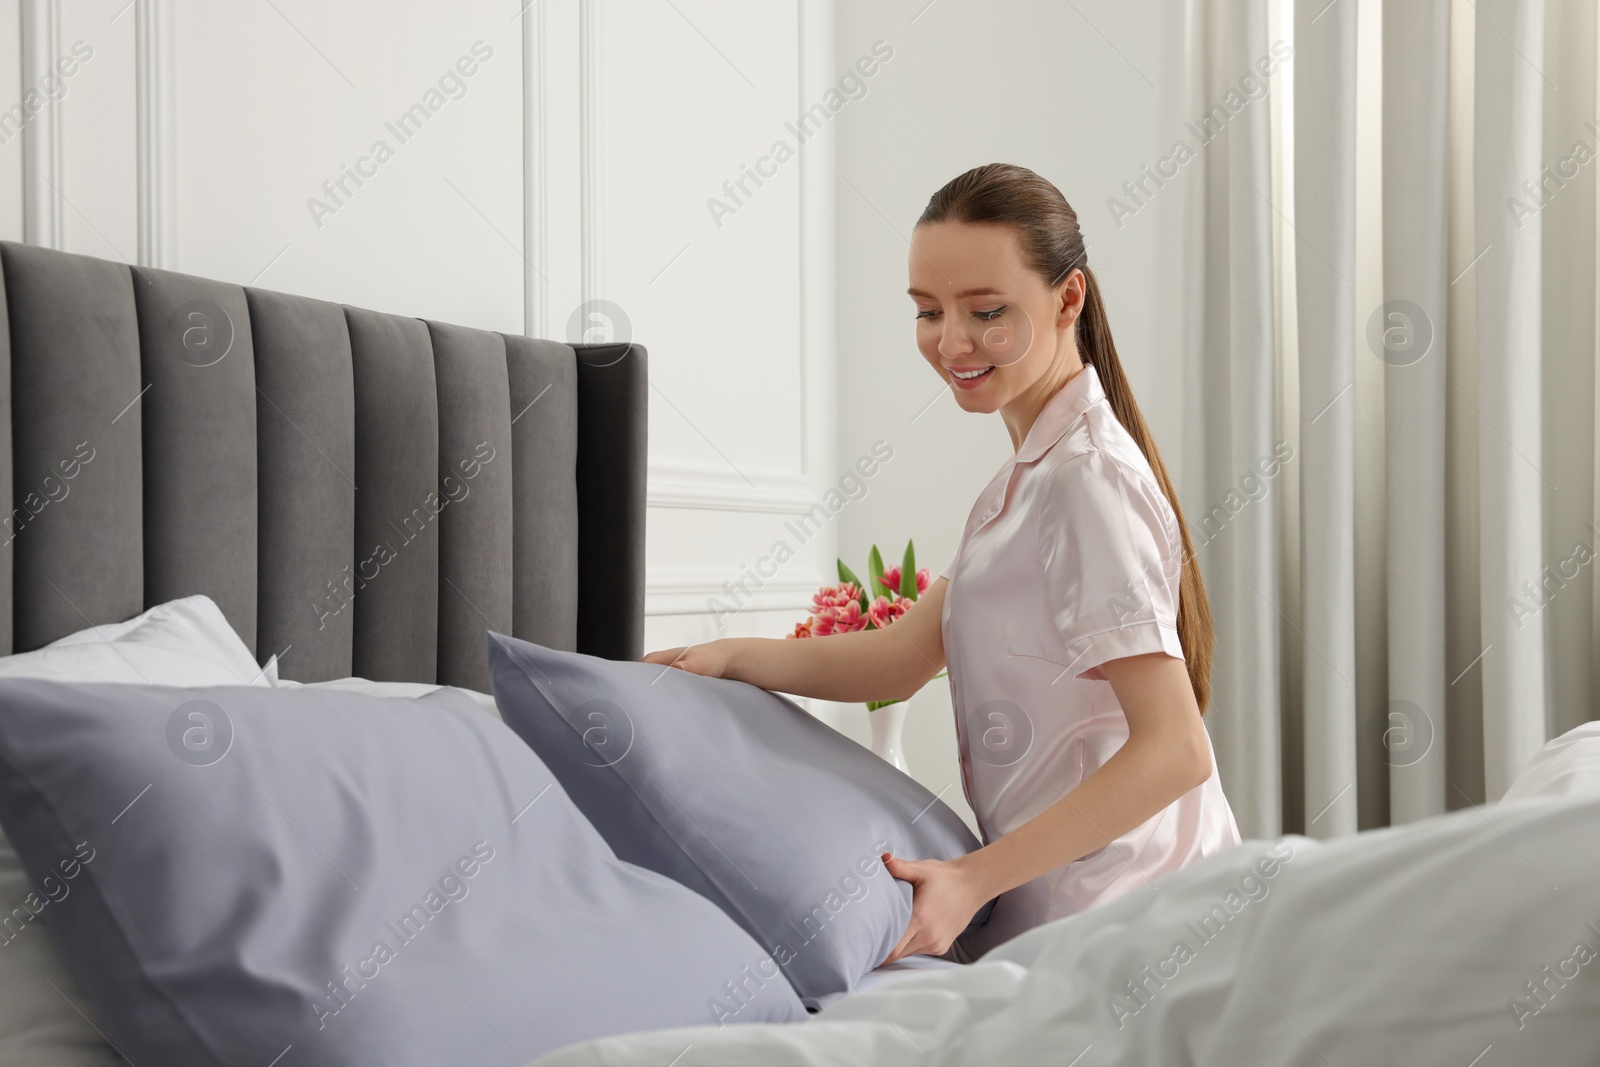 Photo of Young woman making bed in room. Space for text